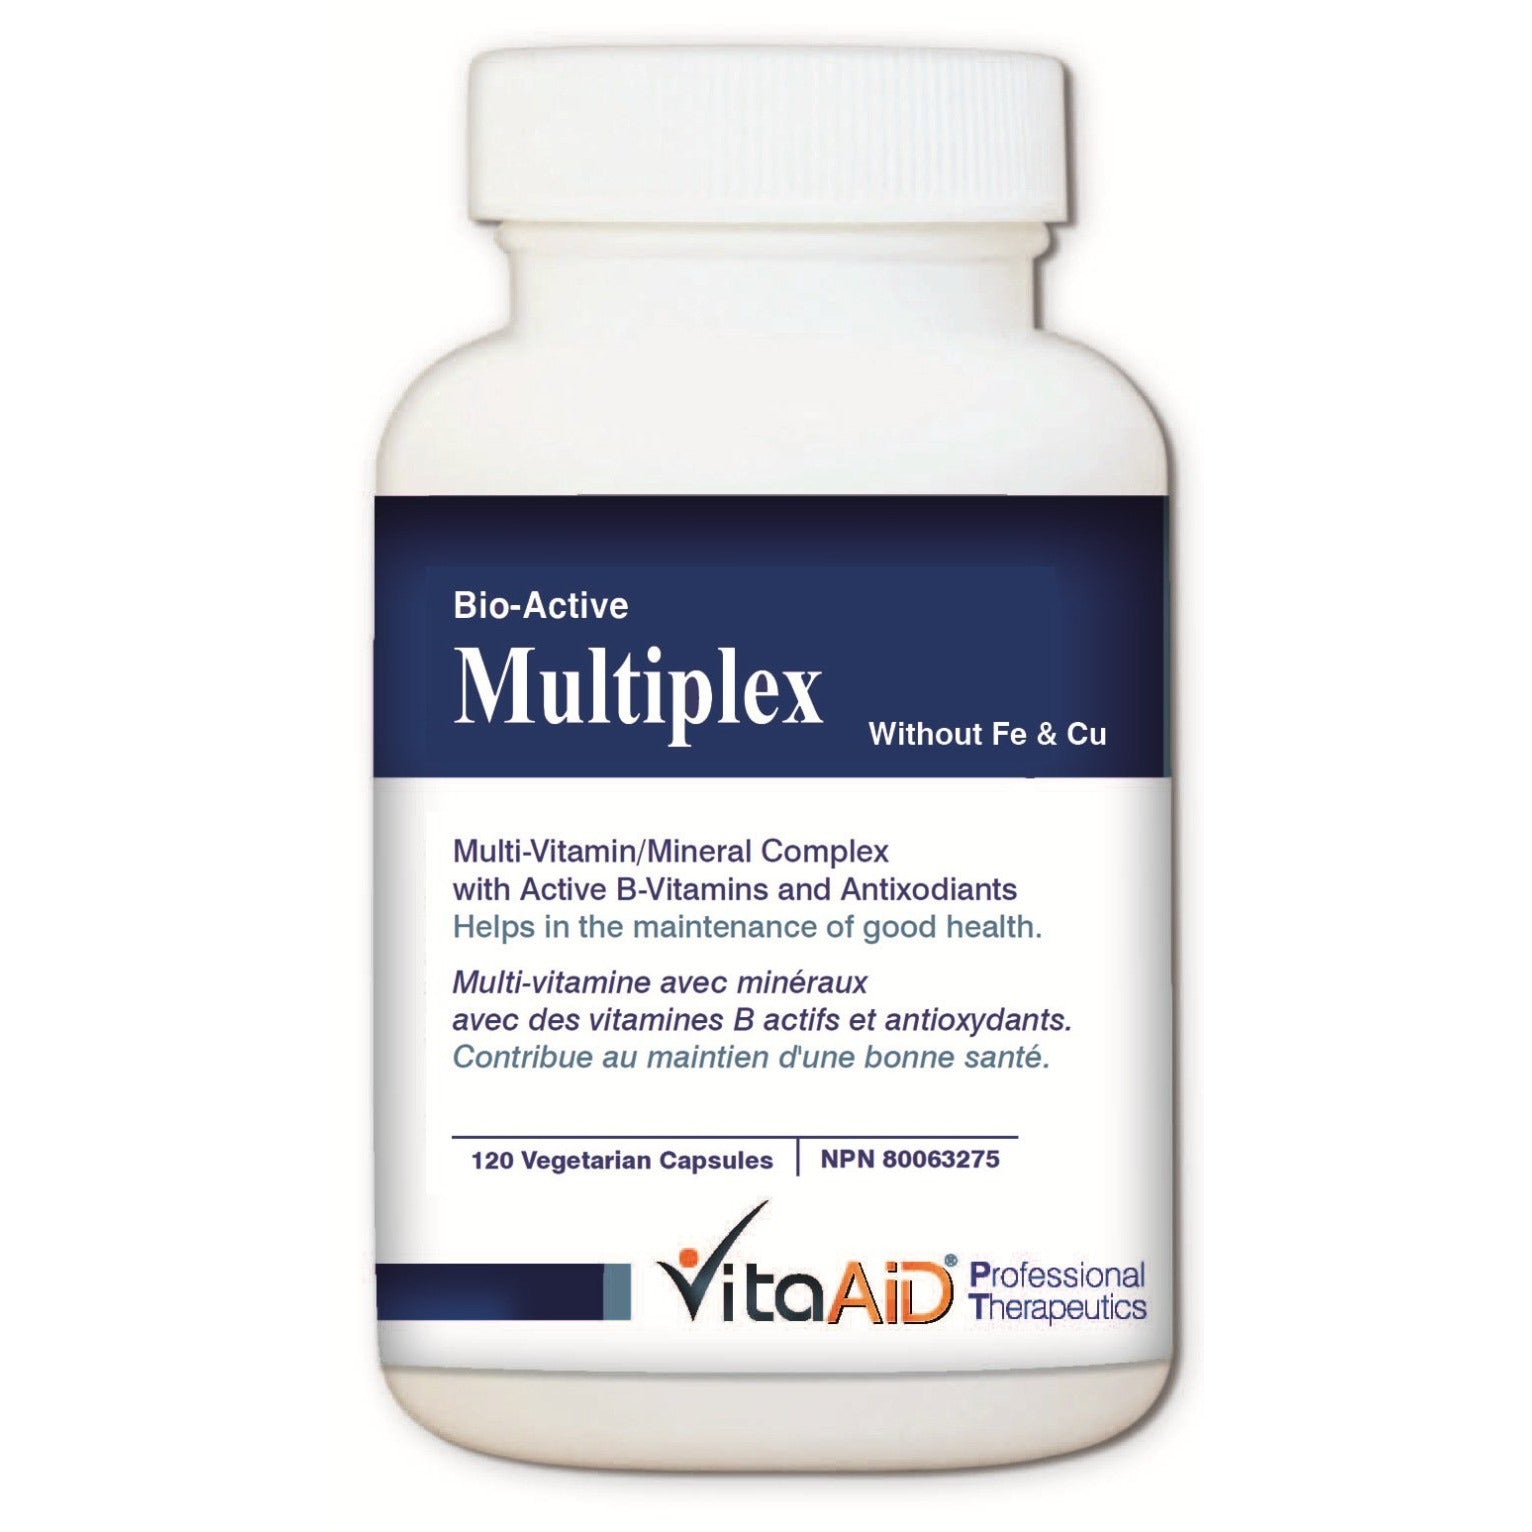 Bio-Active Multiplex WITHOUT Fe & Cu  Multiple Vitamins and Mineral Complex with Active B-Vitamins for Optimal Methylation, Plus Herbs and Antioxidants 120 veg caps - iwellnessbox